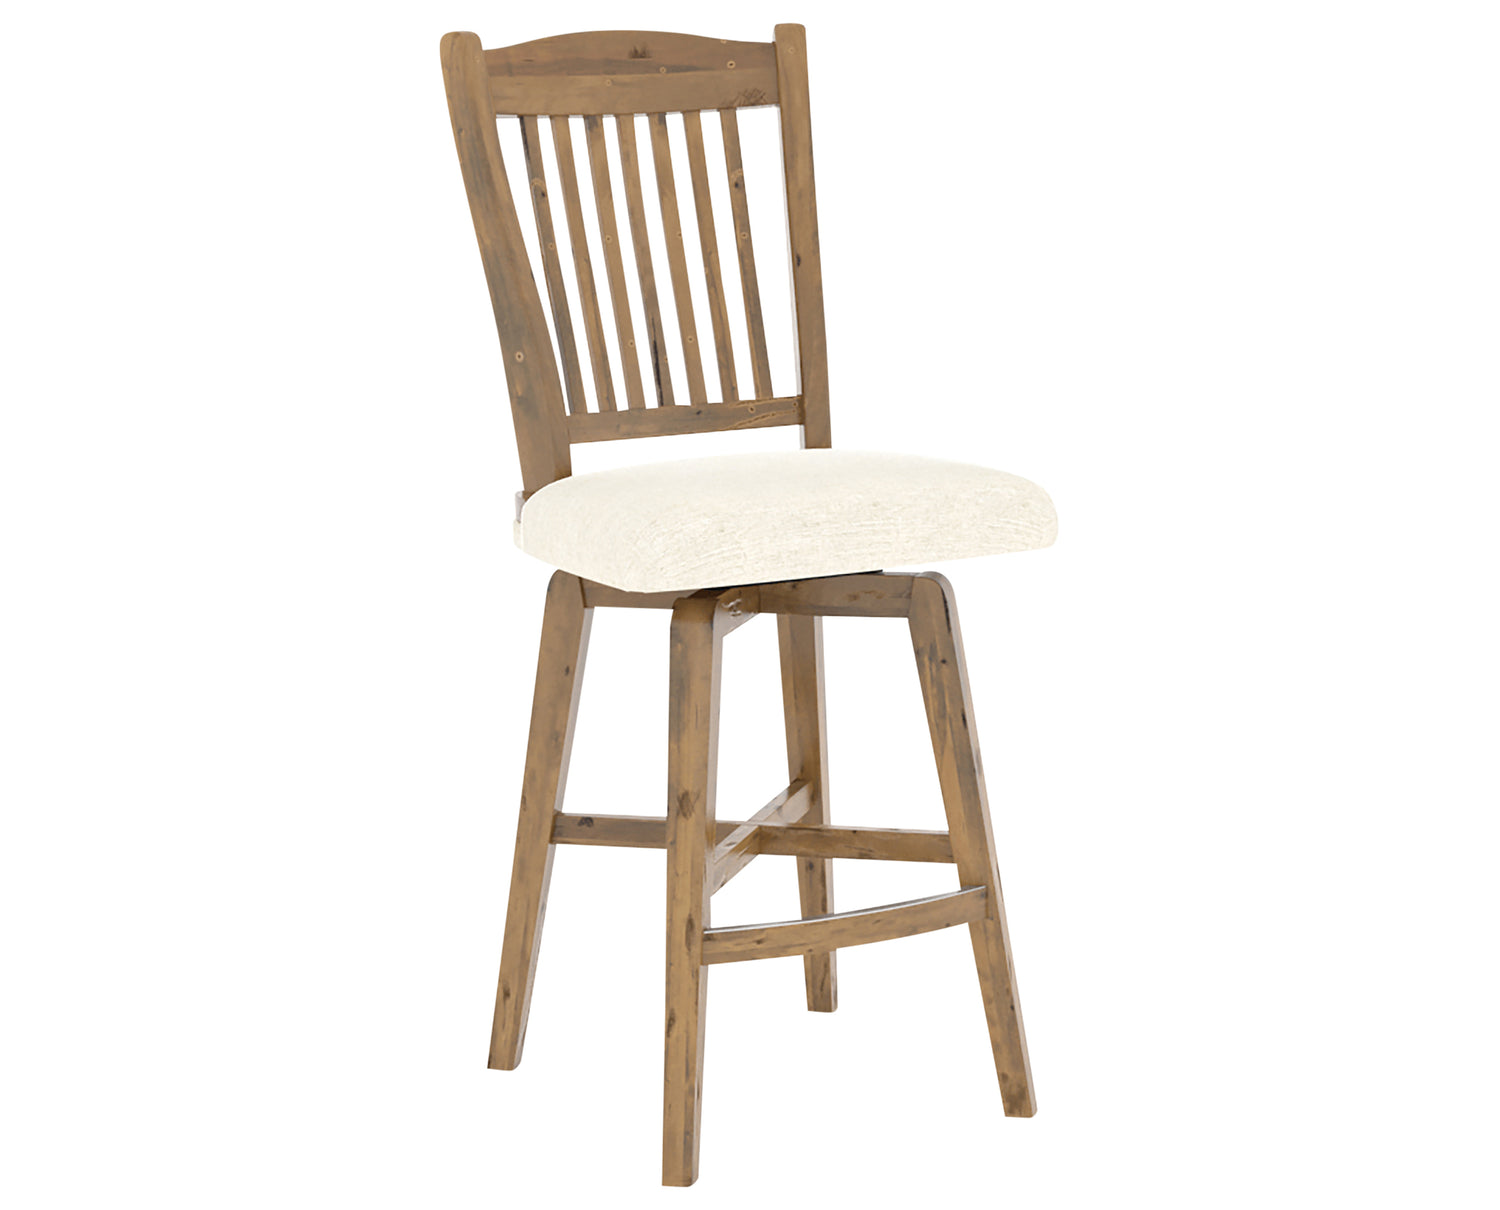 Oak Washed & Fabric TW | Canadel Champlain Counter Stool 7250 | Valley Ridge Furniture